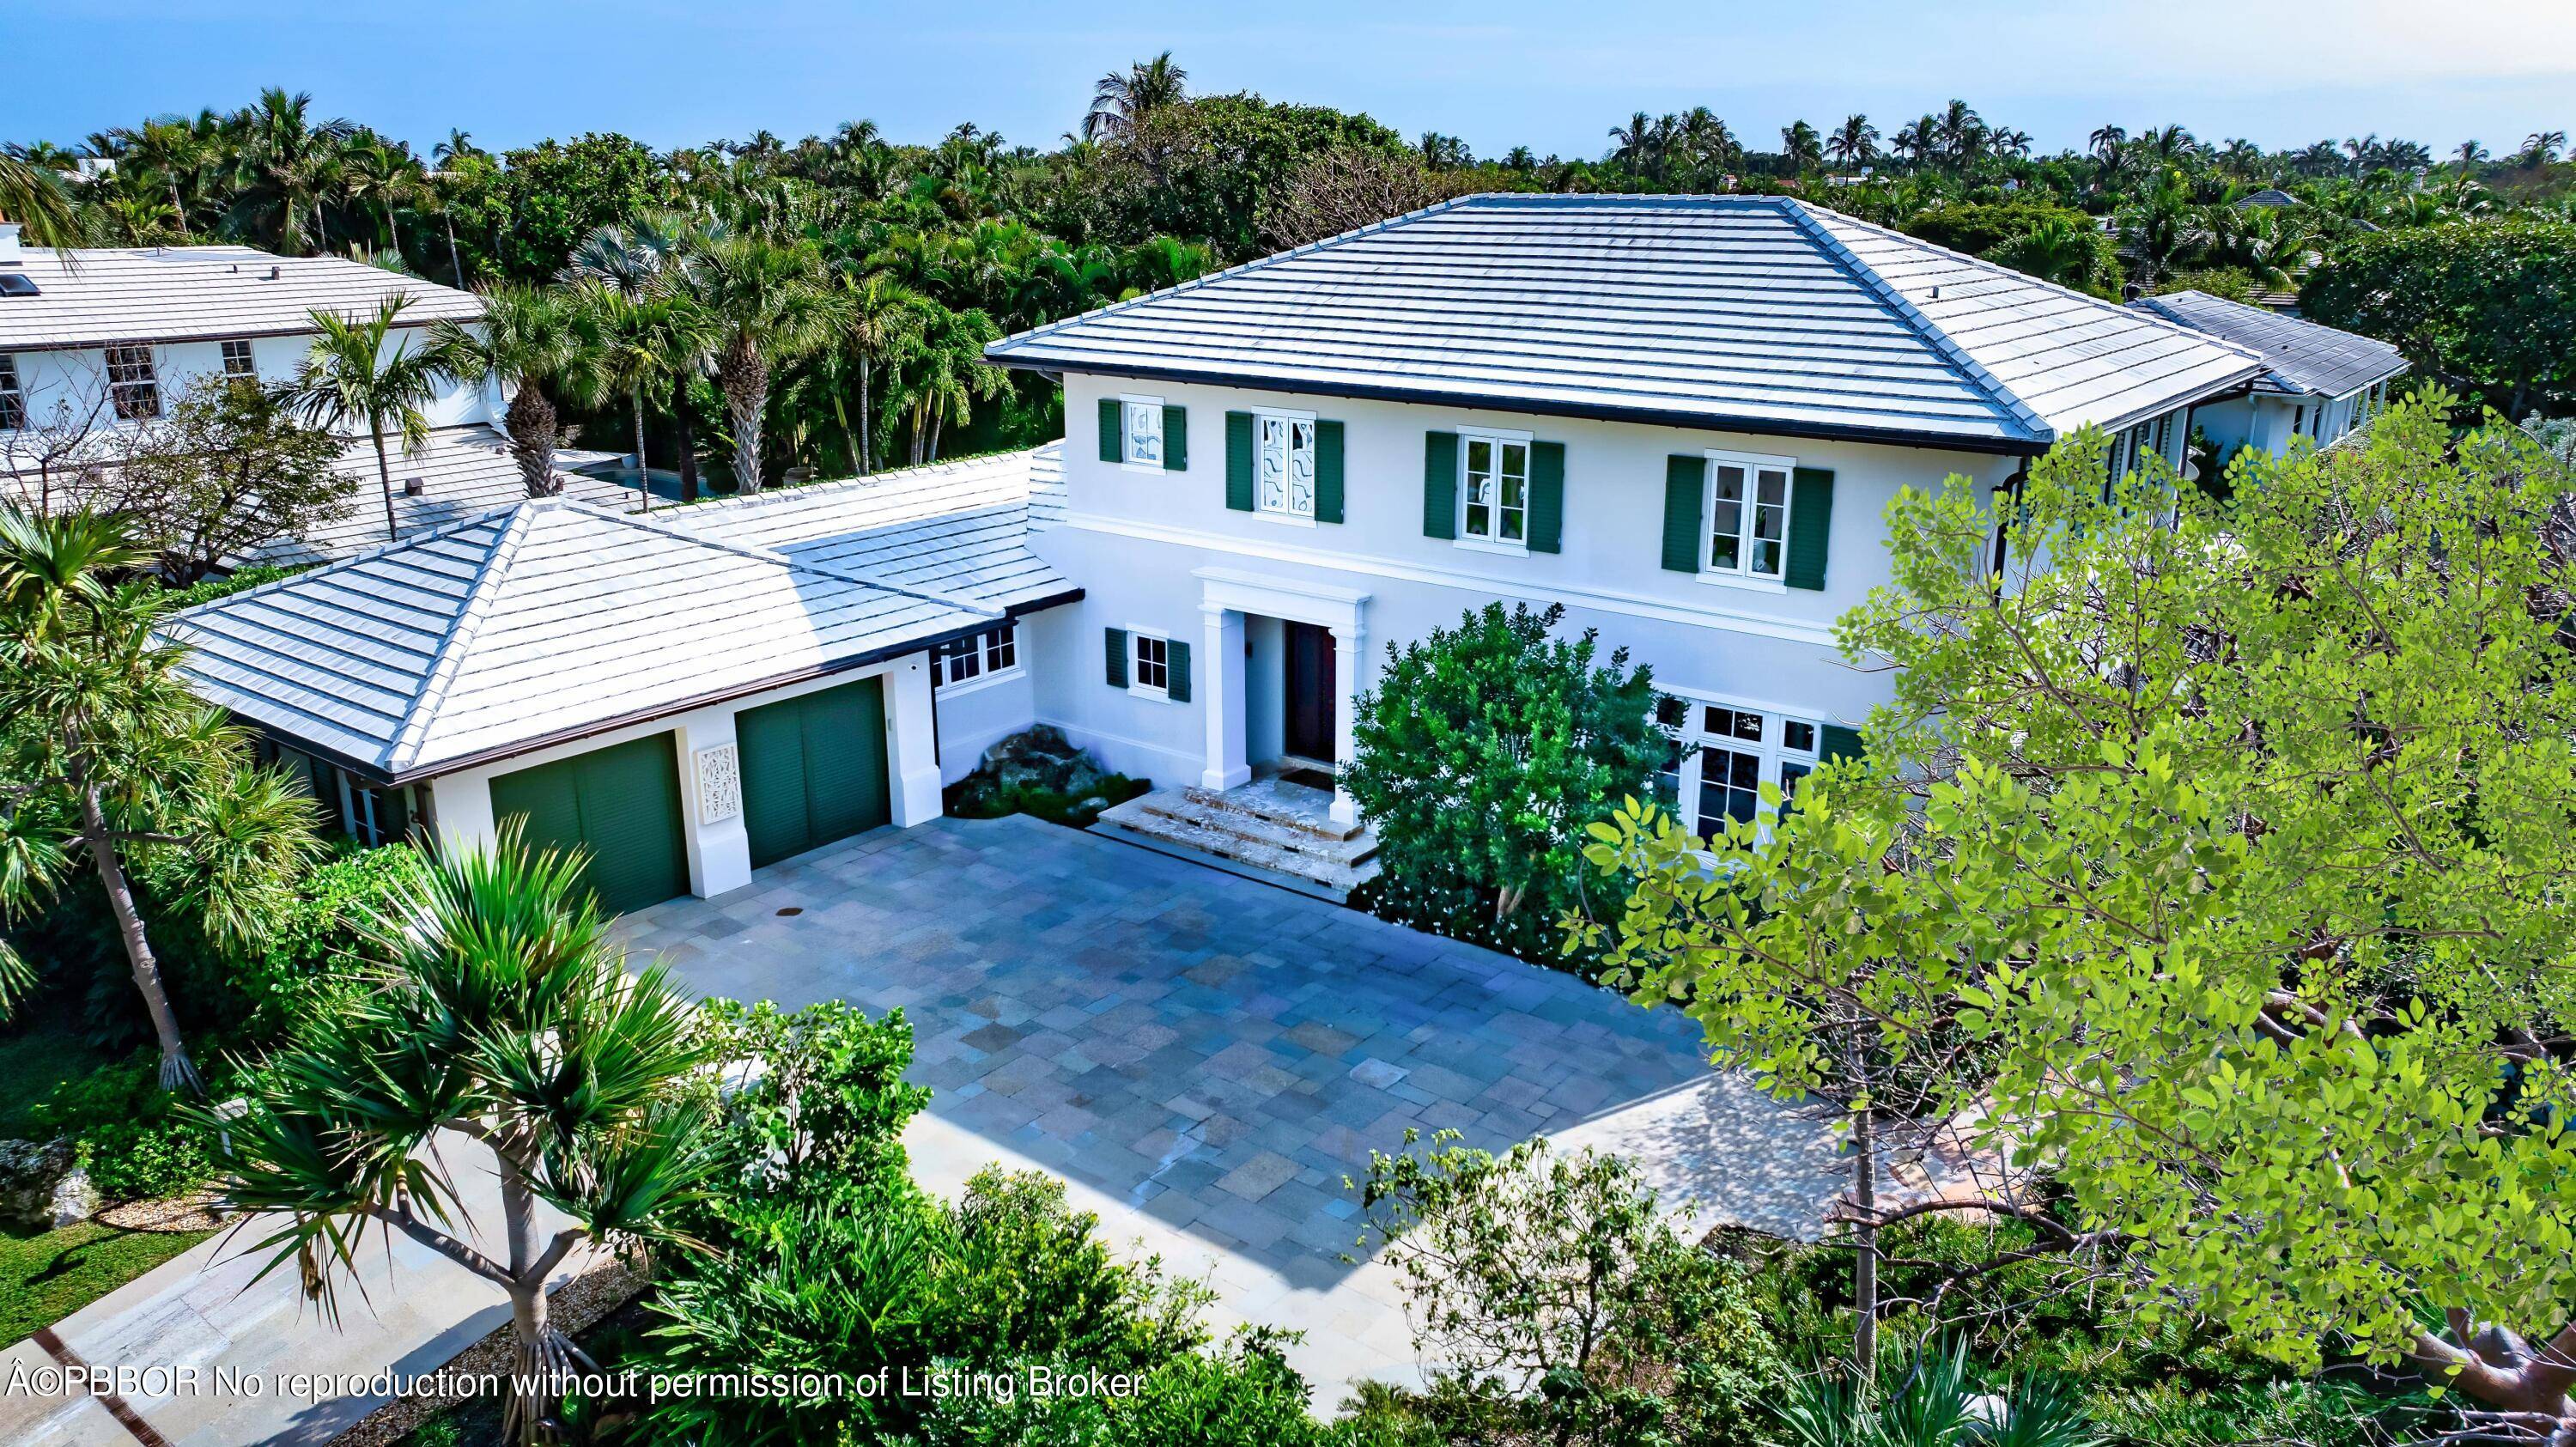 Welcome to 1333 N Lake Way 250 Angler Ave, an exceptional multi structure compound on the North End of Palm Beach Island.